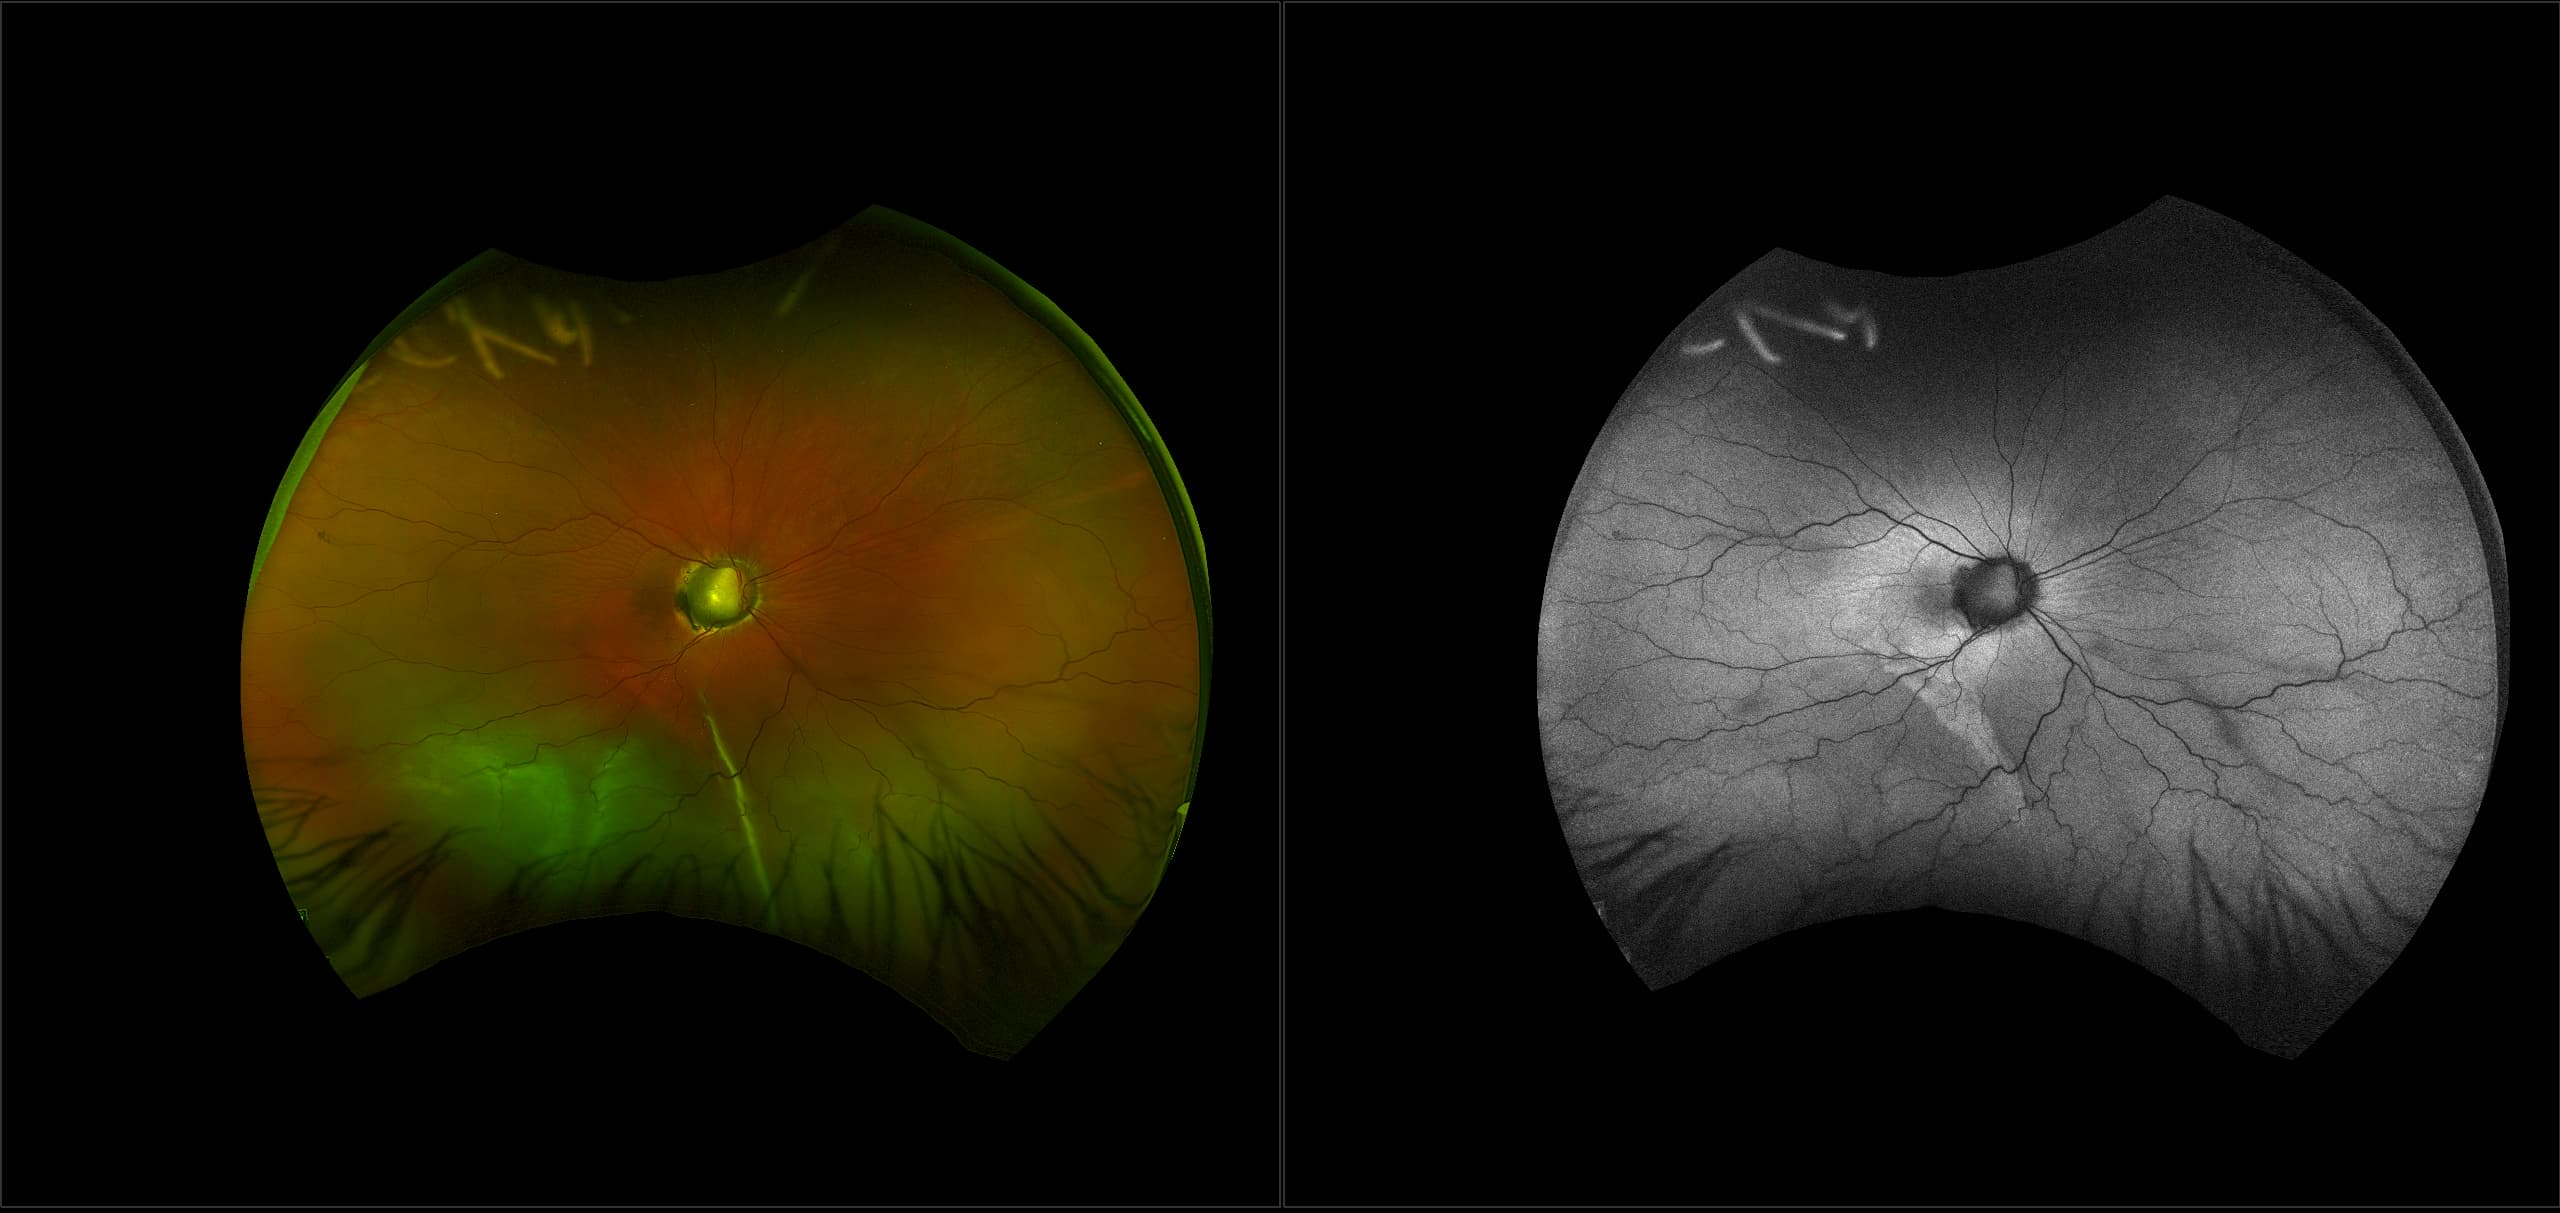 California - Morning Glory Disc Anomaly with Retinal Detachment, RG, AF